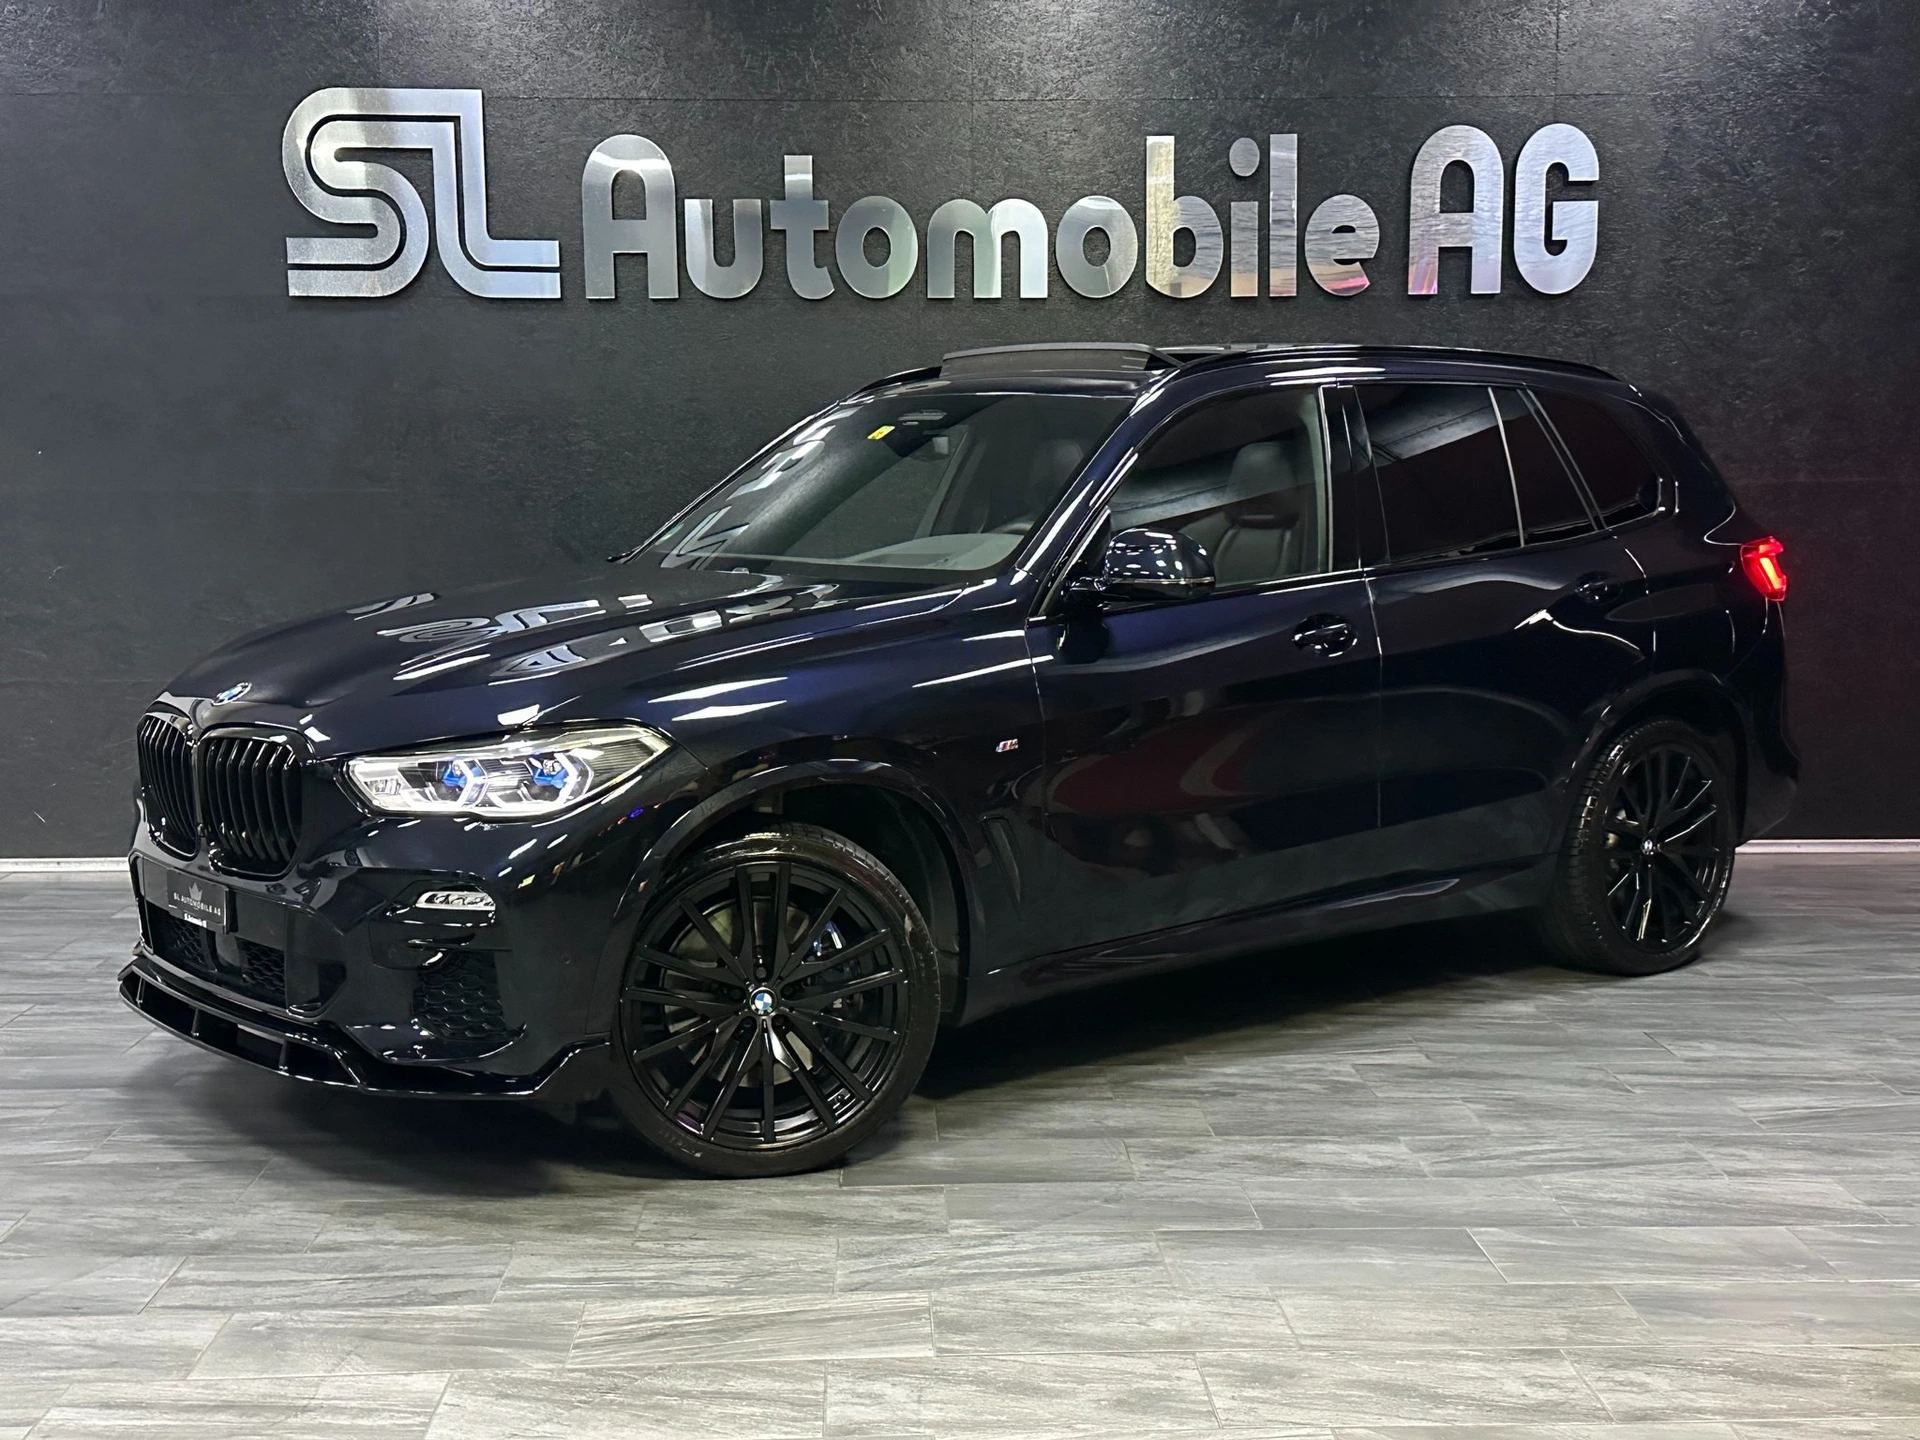 <a href="https://www.autoscout24.ch/de/d/bmw-x5-xdrive-48v-40d-m-sport-steptronic-10883253?slide=1" style="color: white; text-decoration: none;" onmouseover="this.style.color='yellow'" onmouseout="this.style.color='white'">BMW X5 xDrive 48V 40d M Sport Steptronic</a>